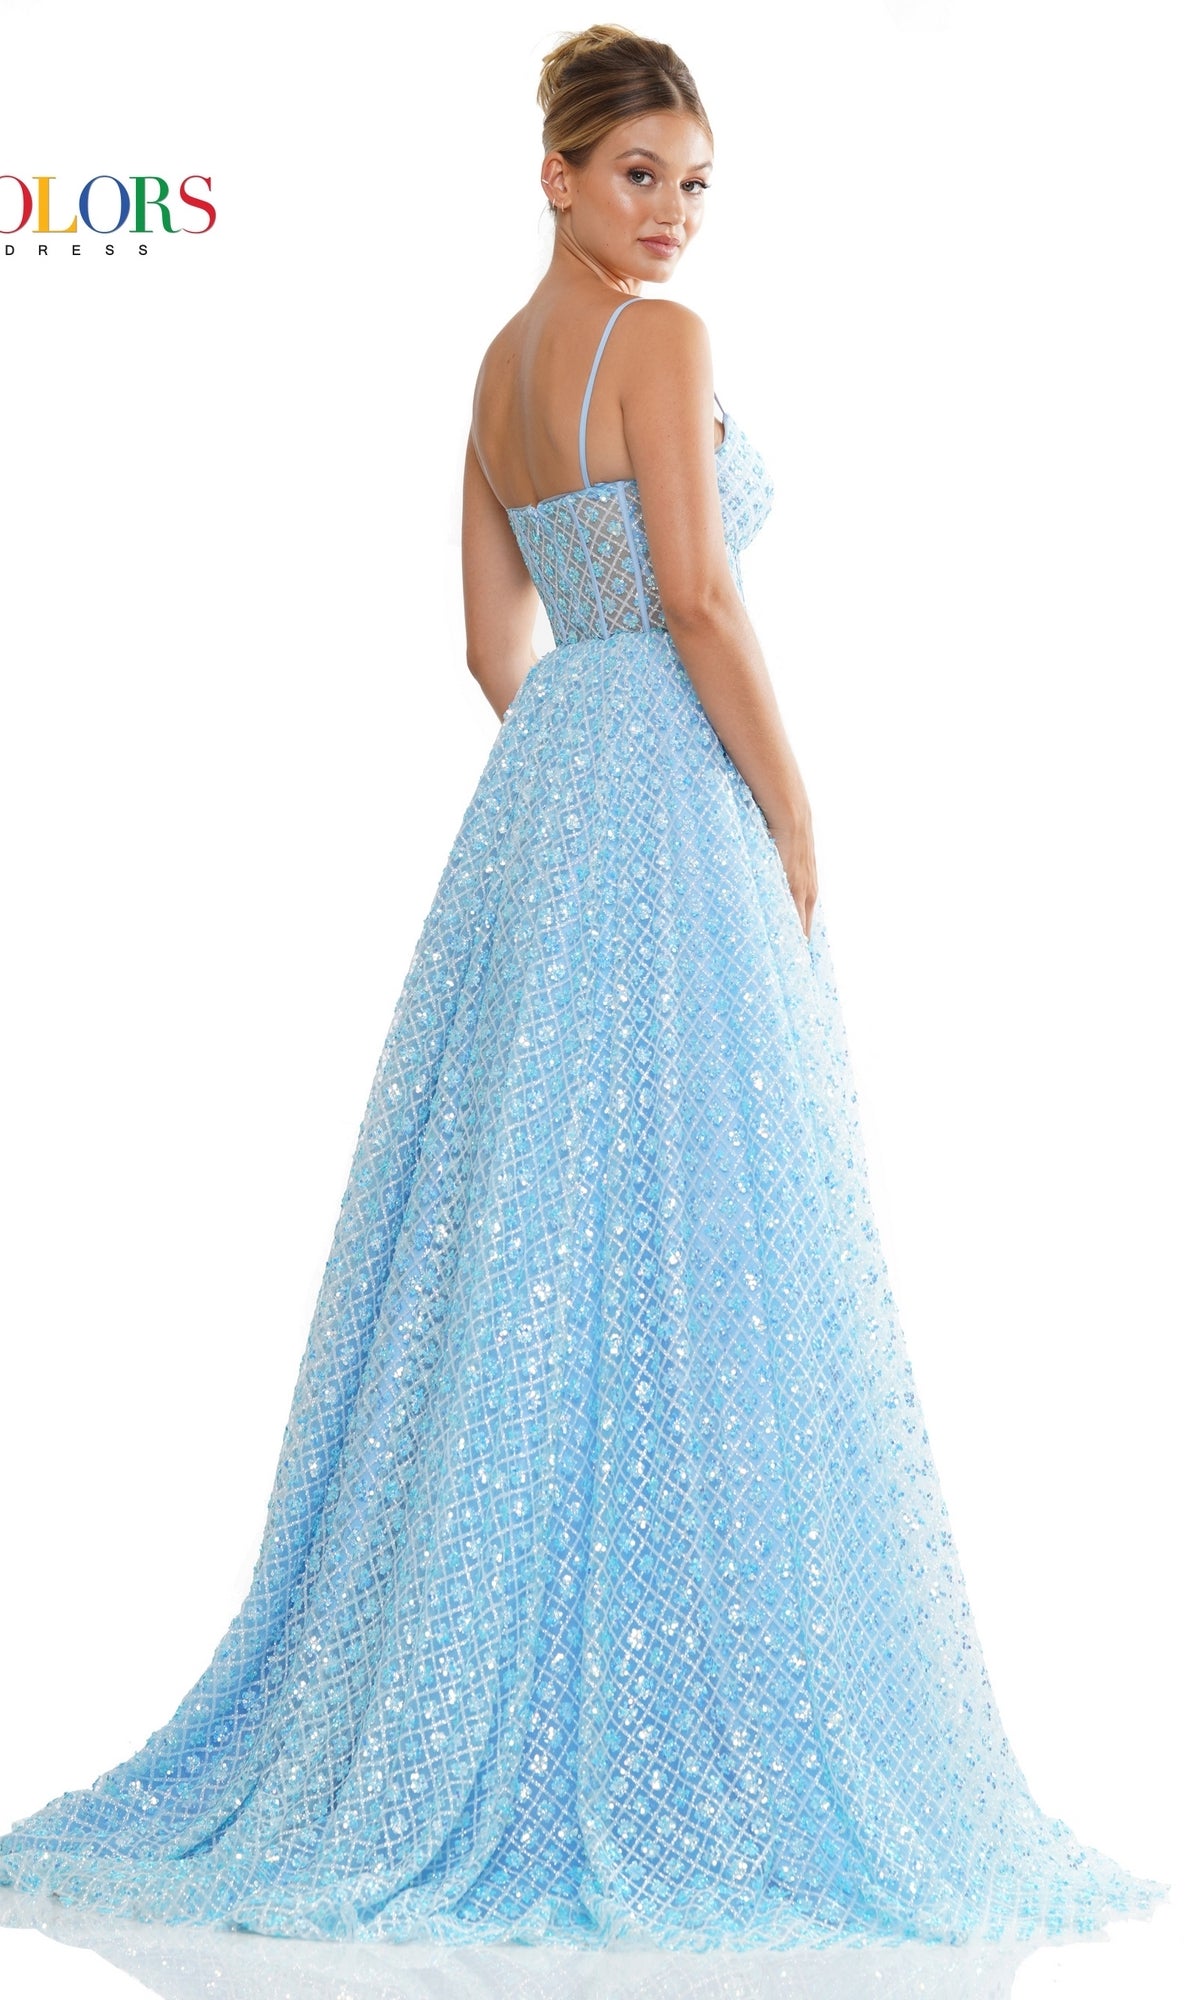 Colors Dress Sparkly Prom Ball Gown 3234